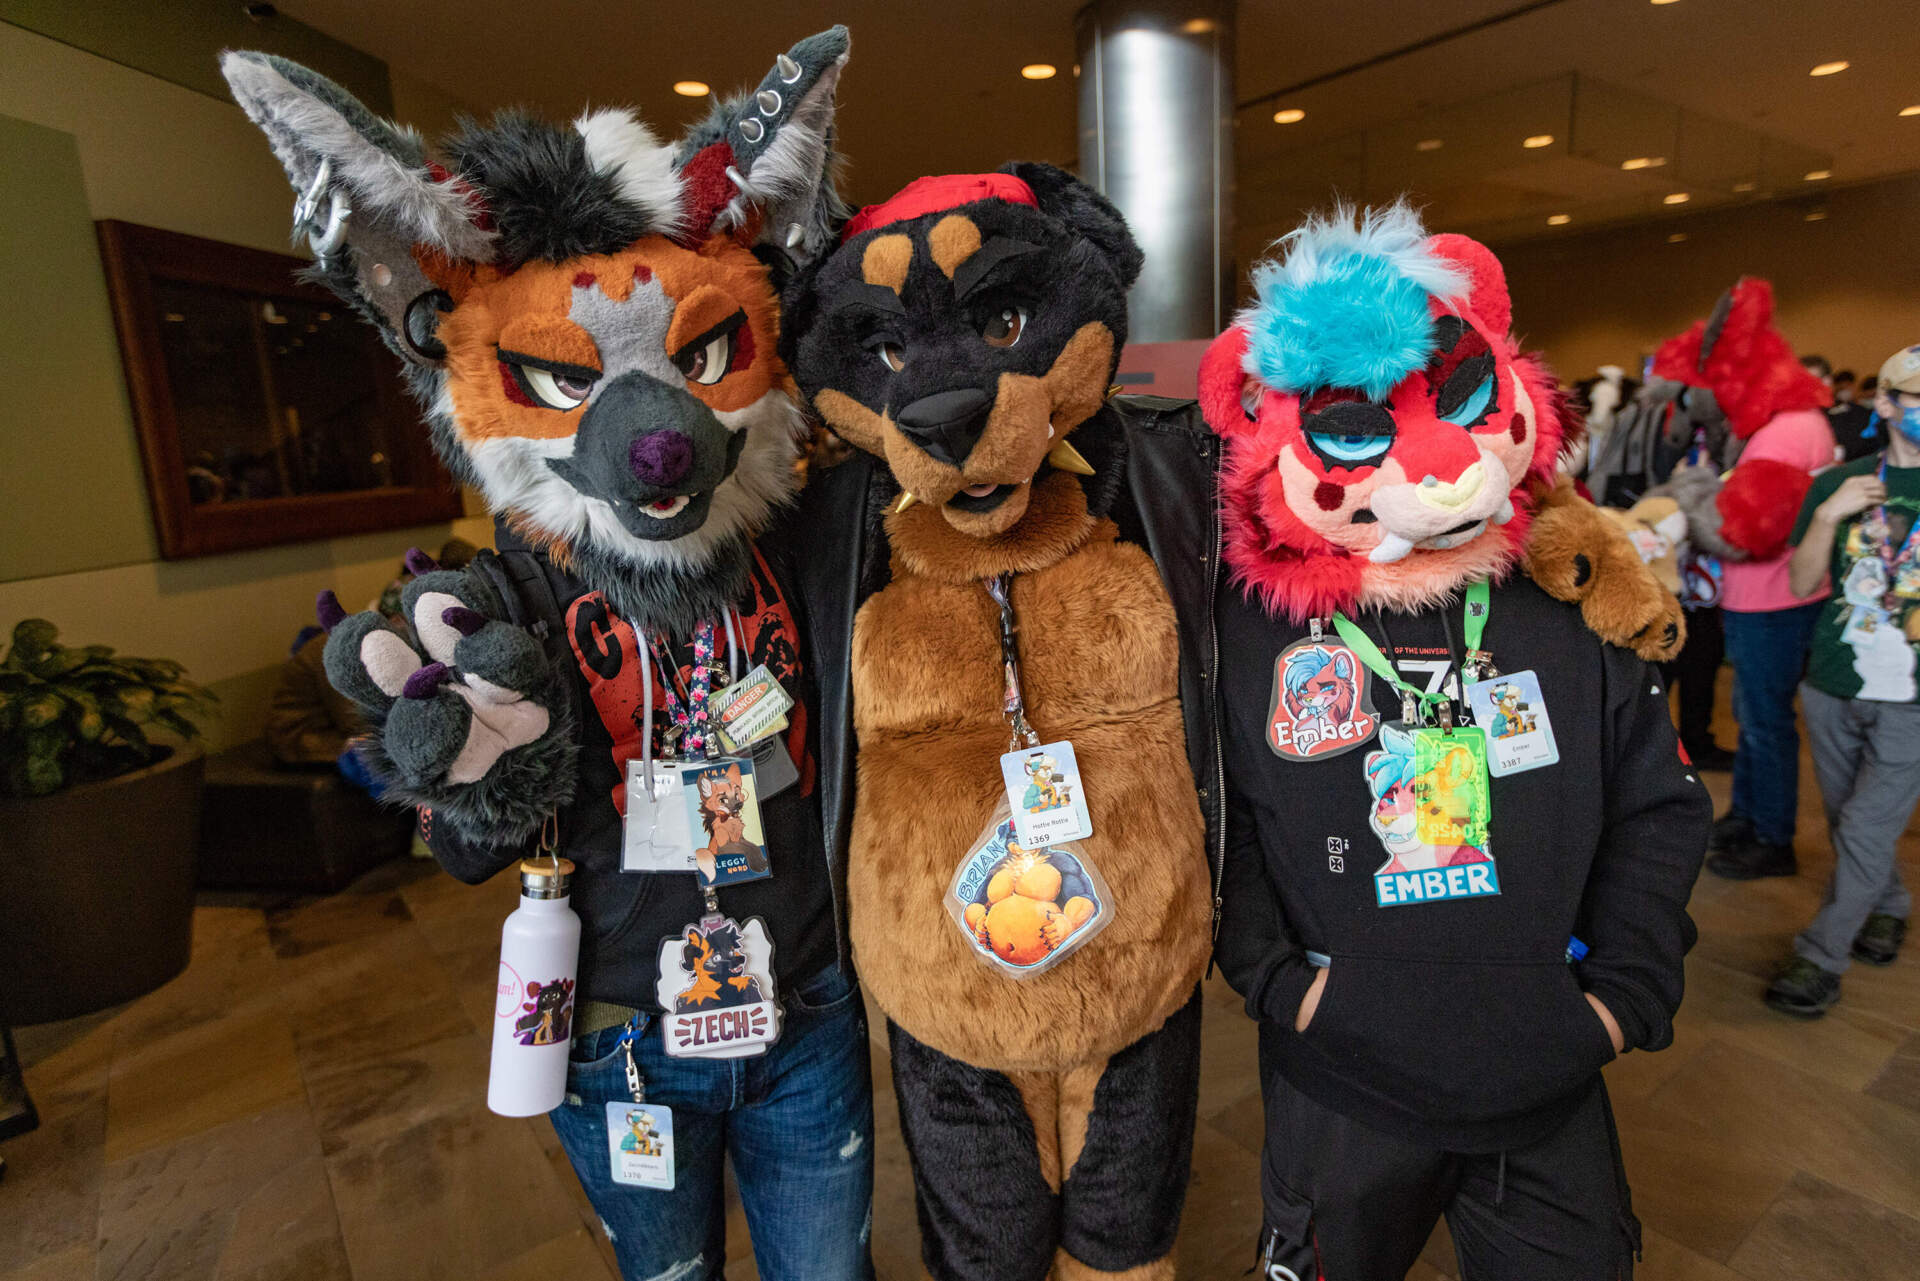 Zack Snodgrass a.k.a Zech, a maned wolf from Philadelphia; Brian Pyle a.k.a Brian, a Rottweiler also from Philly; and Brandon Gonzalez a.k.a Ember, a sabertooth tiger who traveled from Mexico to attend the Anthro New England conference. (Jesse Costa/WBUR)